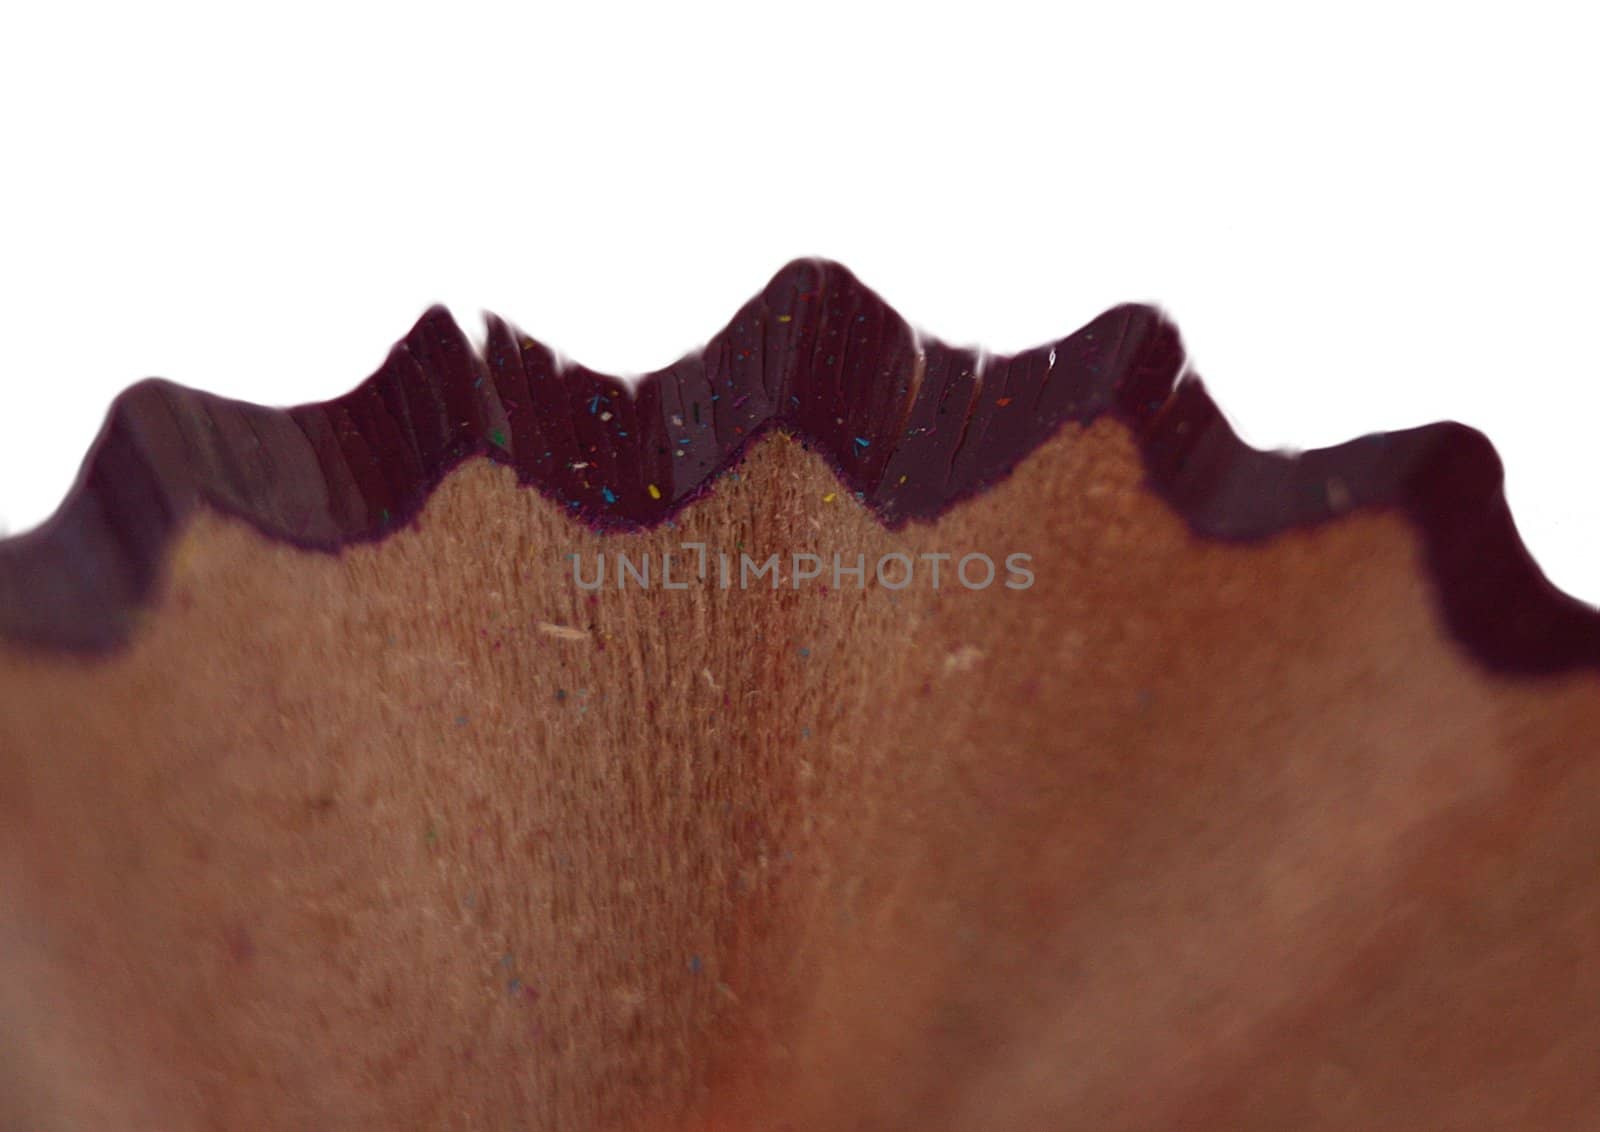 Part of shavings from a purple pencil isolated on white background